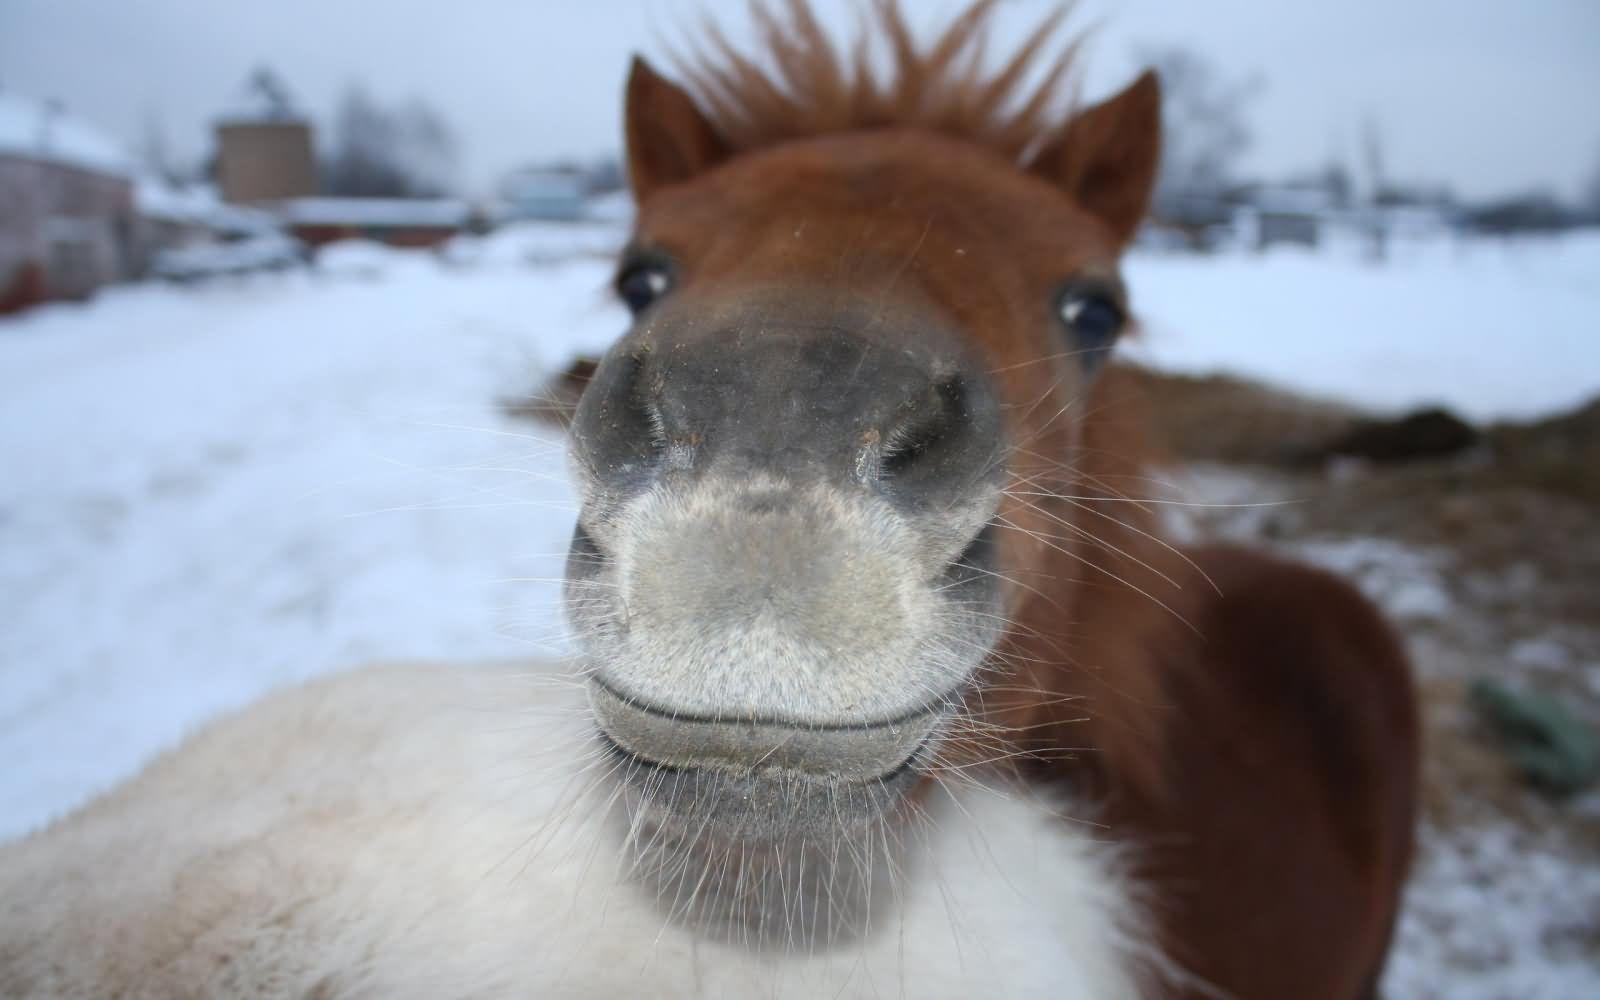 Most Funny Donkey Face Picture That Will Make You Laugh